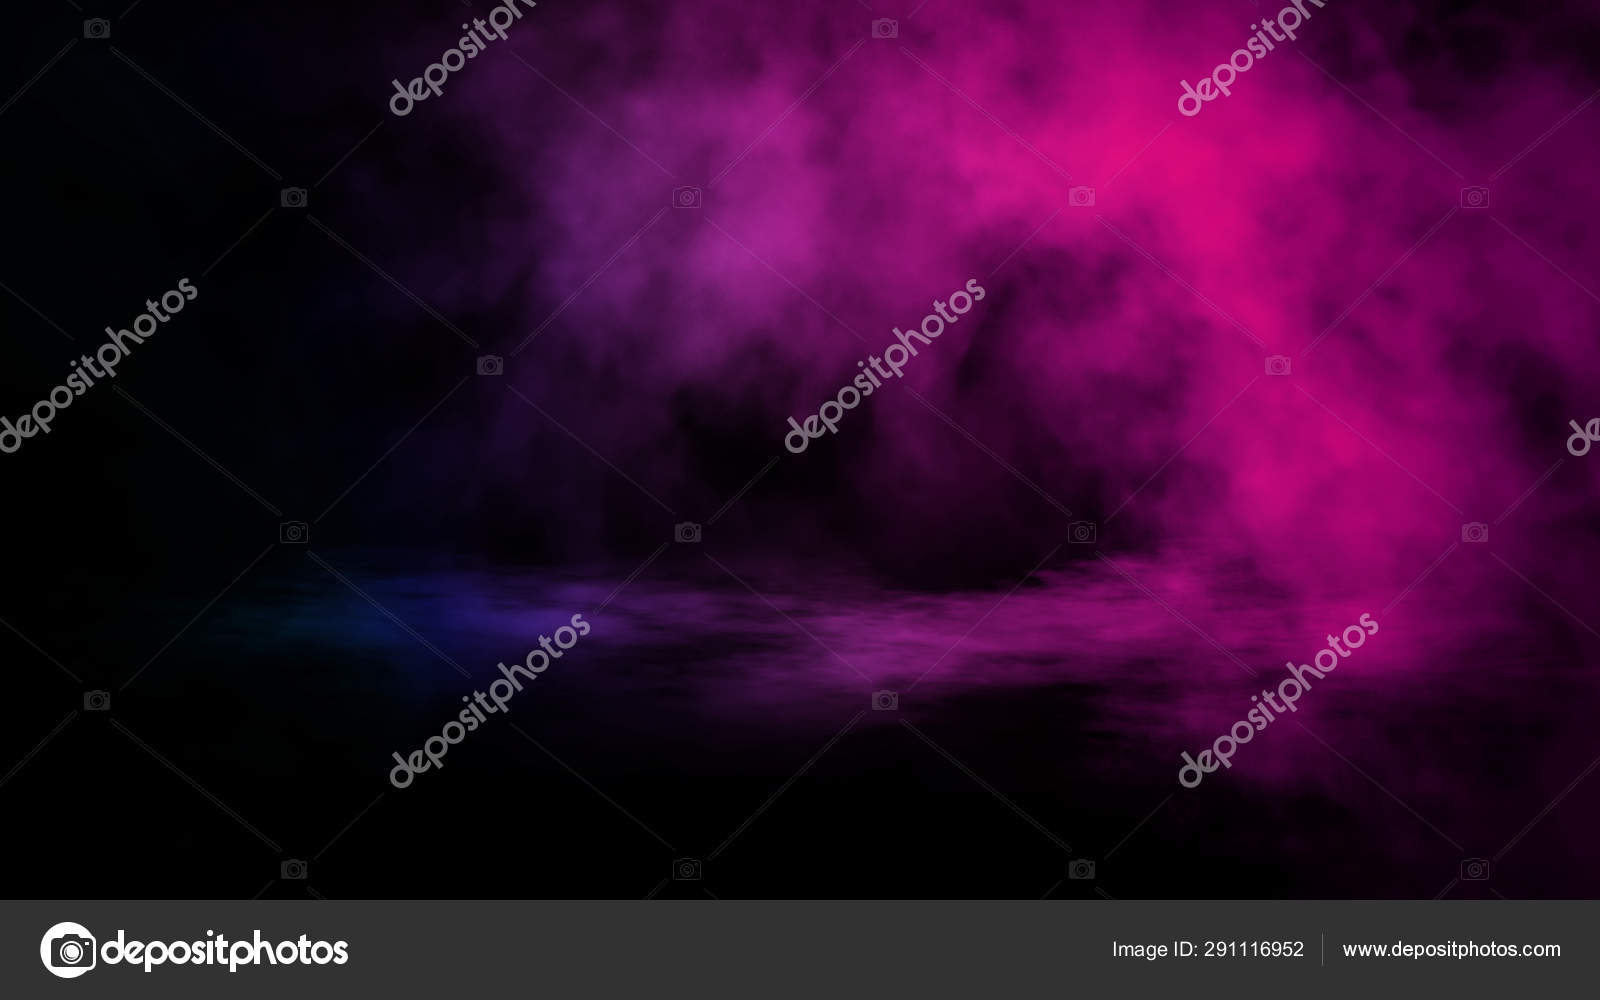 Purple Smoke Steam Background Wallpaper Image For Free Download - Pngtree